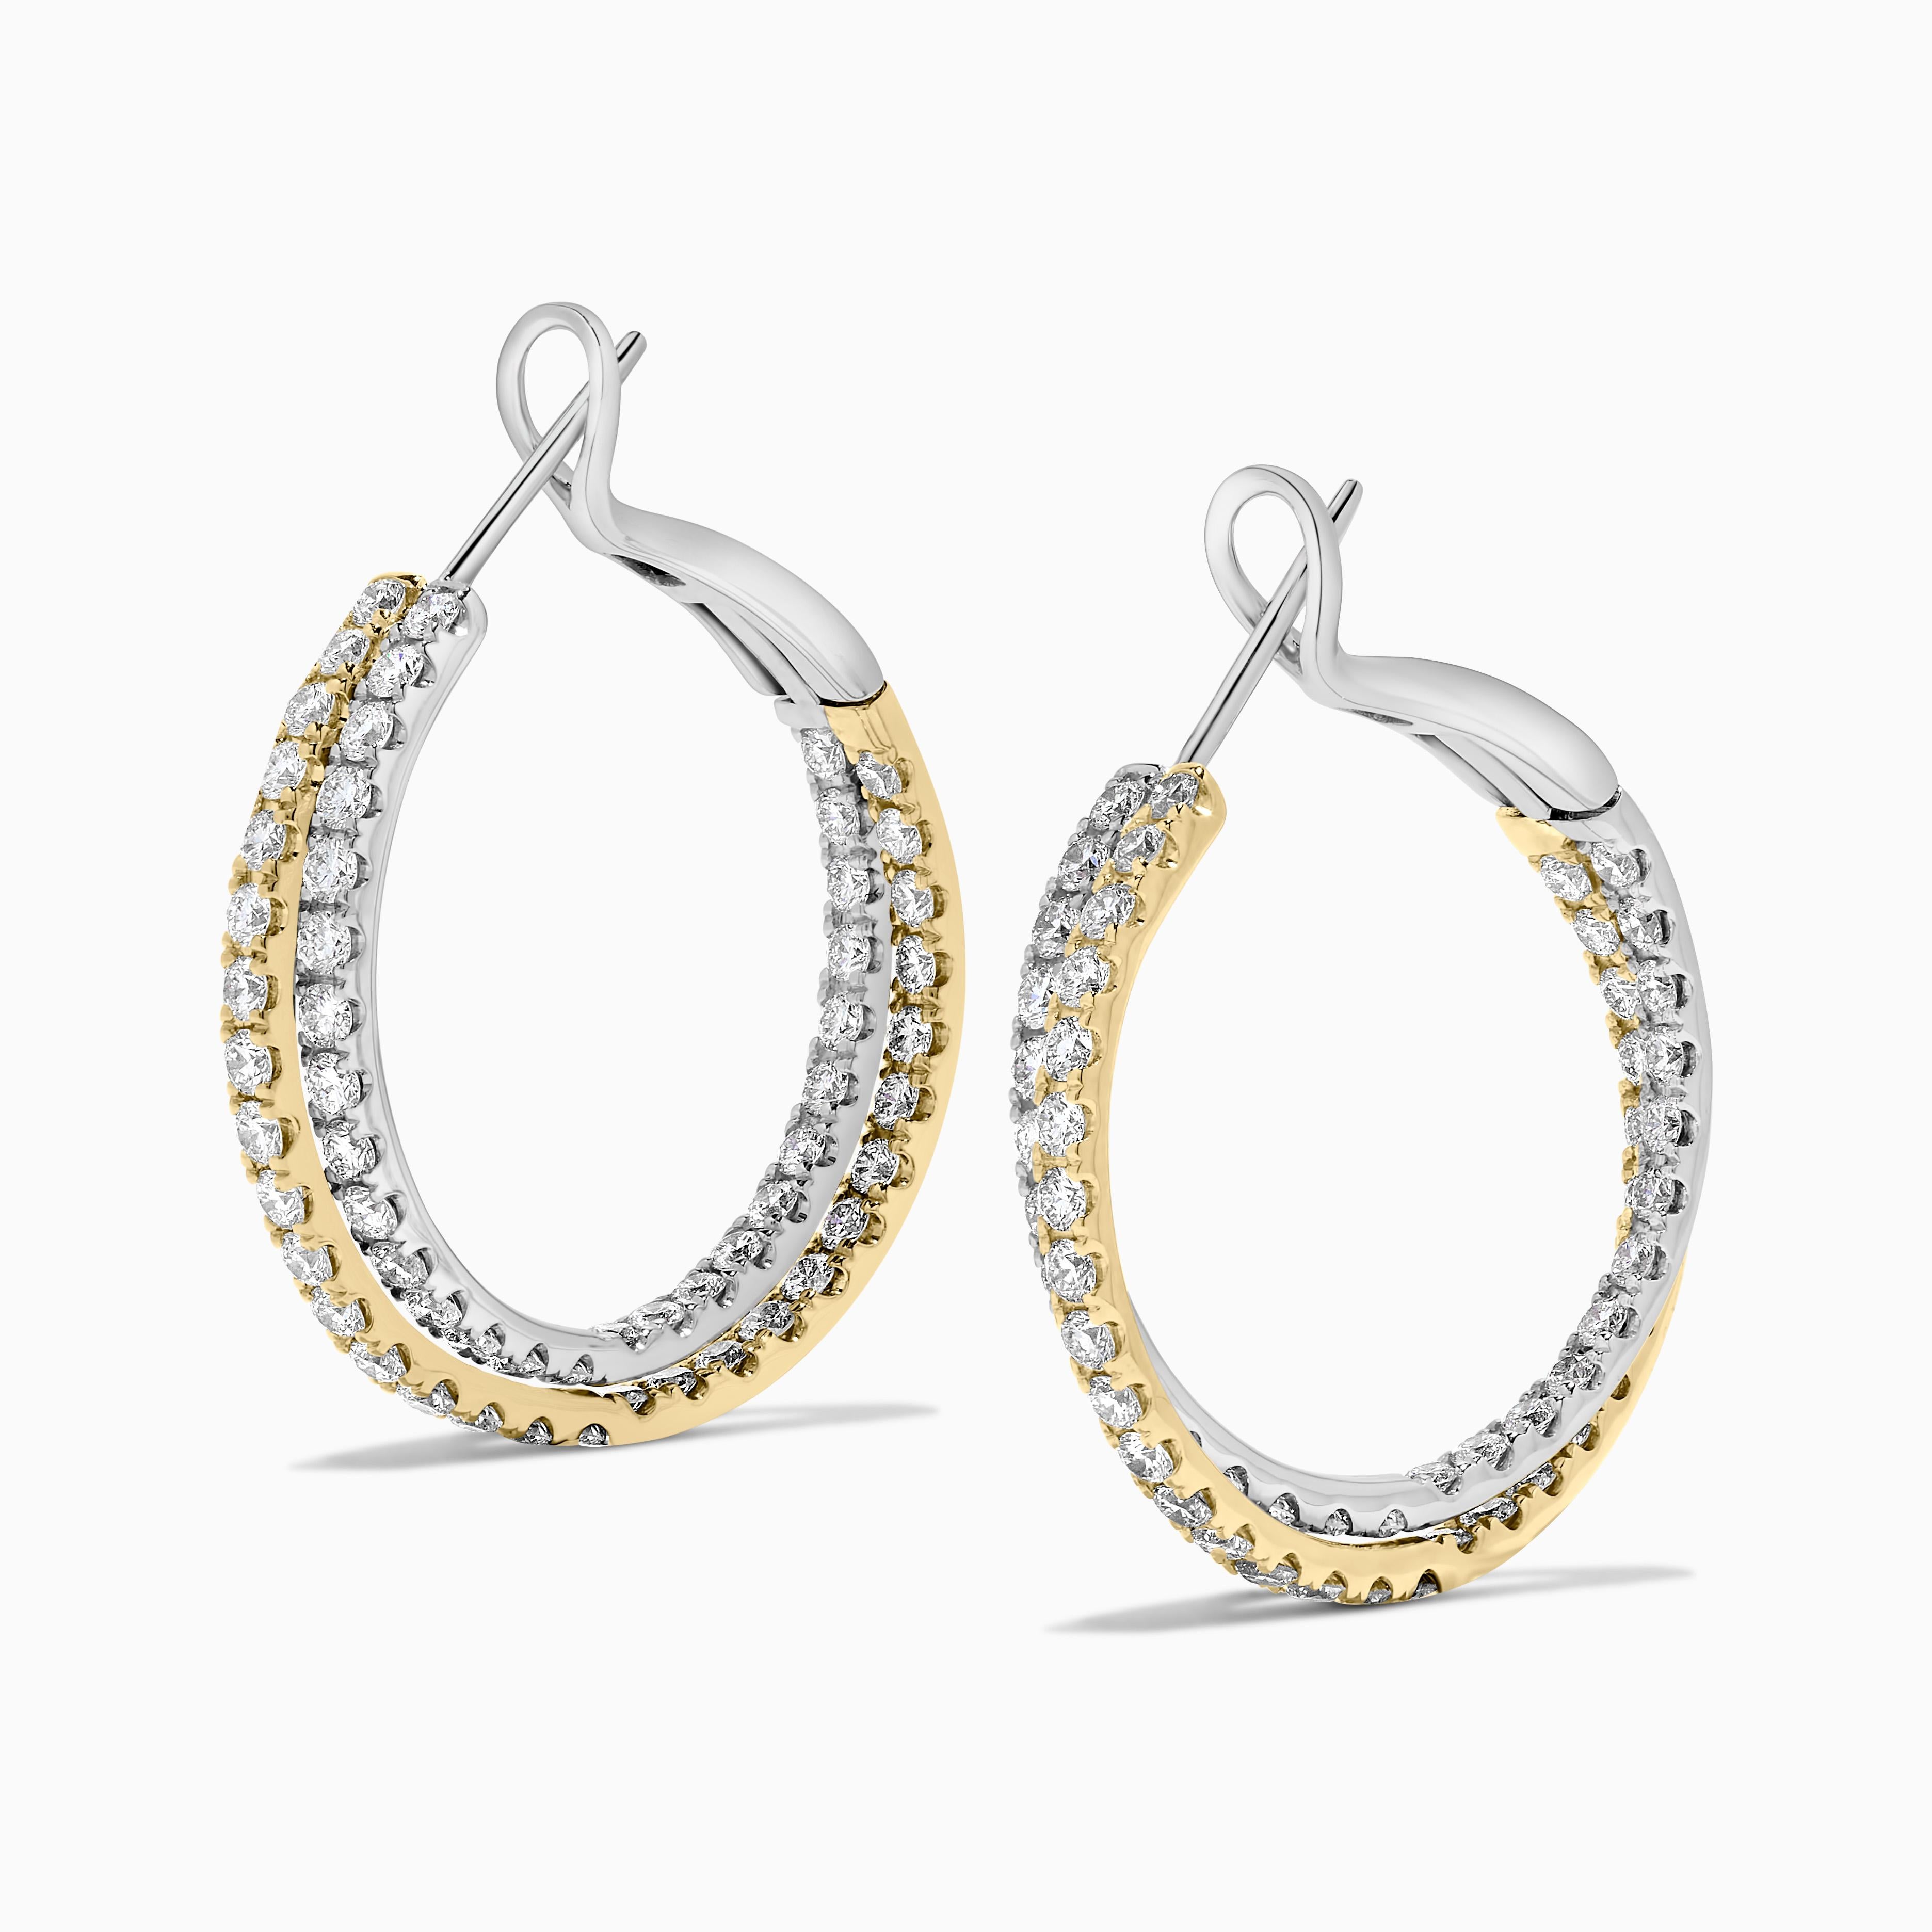 RareGemWorld's classic diamond earrings. Mounted in a beautiful 18K Yellow and White Gold setting with natural round cut white diamonds. These earrings are guaranteed to impress and enhance your personal collection!

Total Weight: 2.76cts

Width: